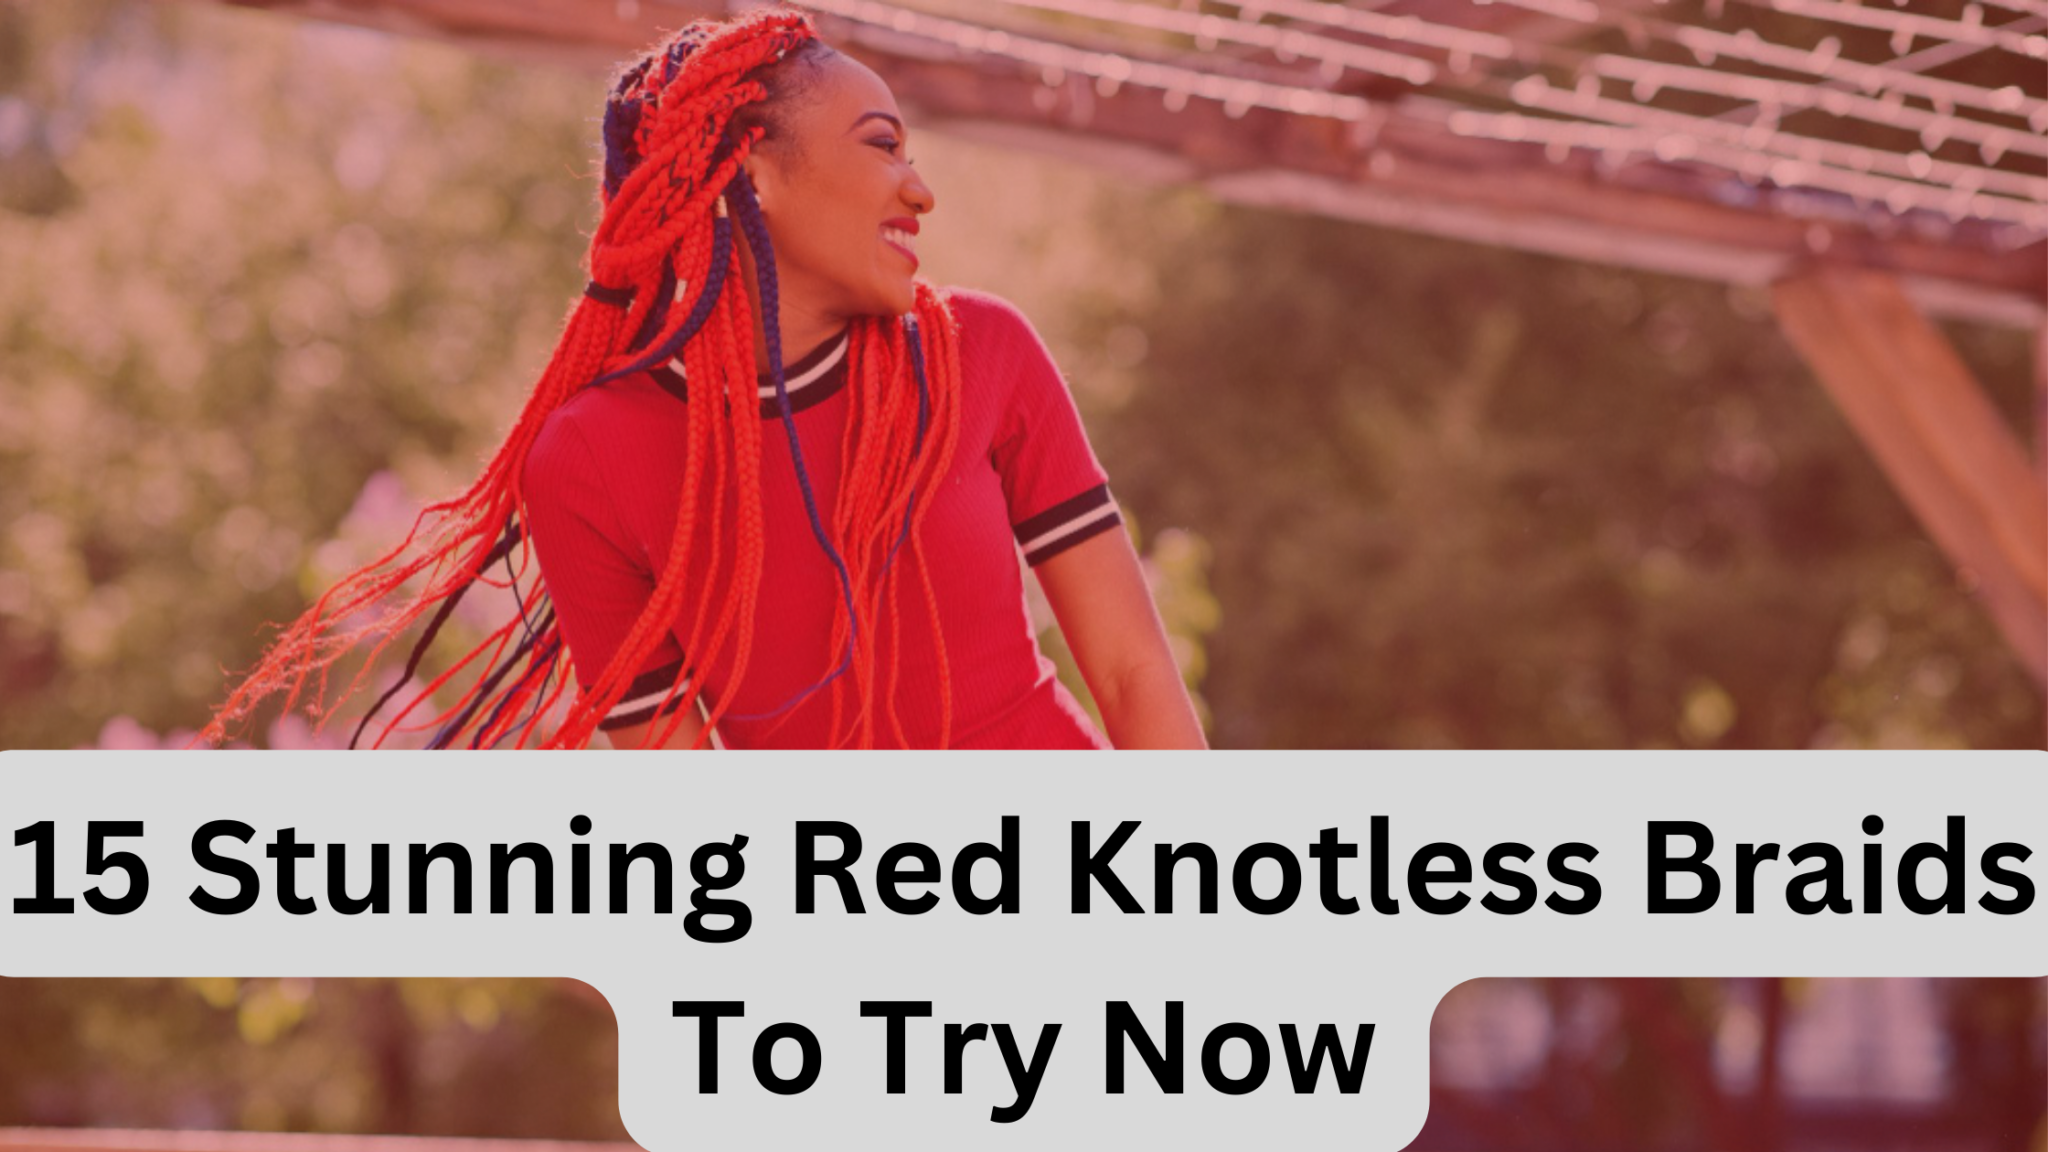 15 Stunning Red Knotless Braids To Try Now